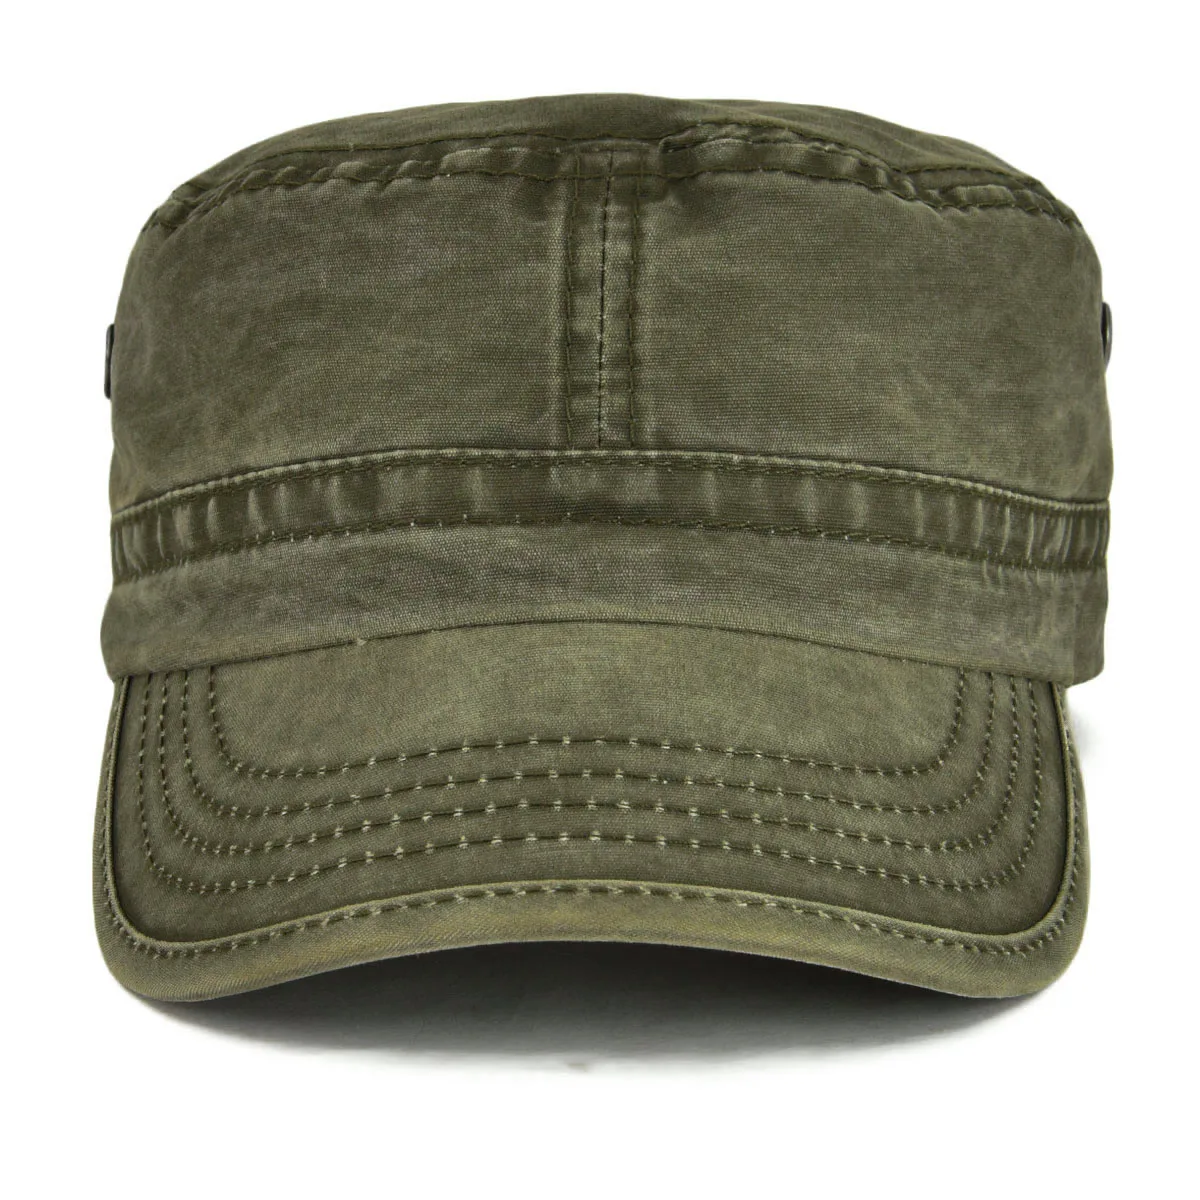 VOBOOM Washed Cotton Military Cadet Army Caps for Men Unique Design Adjustable Vintage Flat Top Hats with Air Hole 3